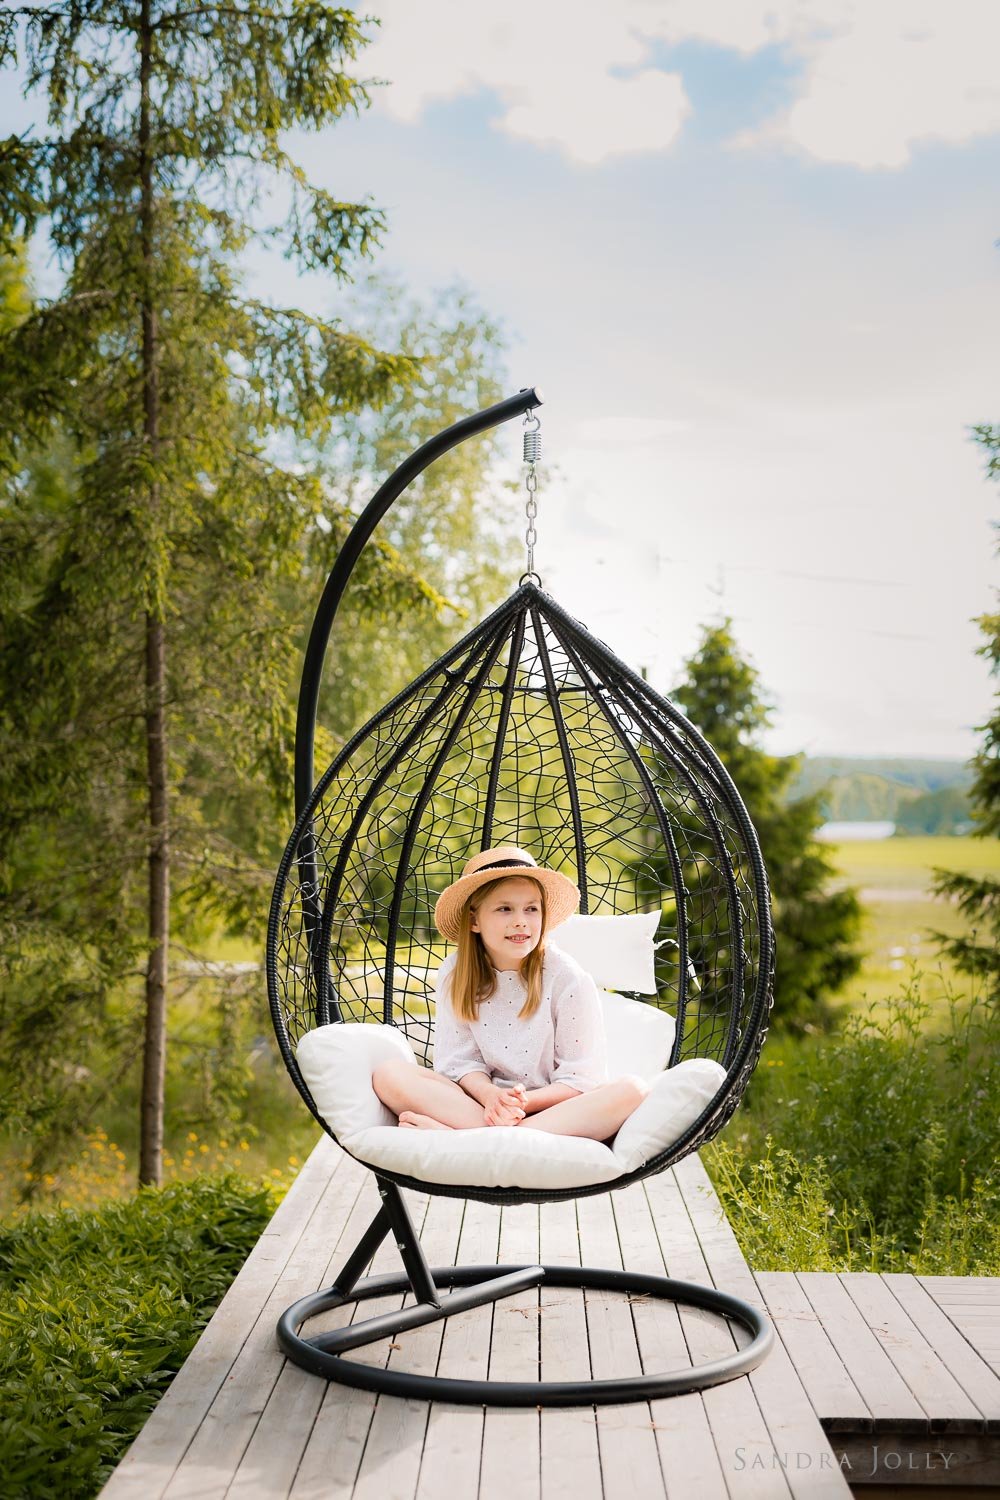 sigtuna-at-home-photo-session-by-stockholm-fotograf-sandra-jolly-photography.jpg